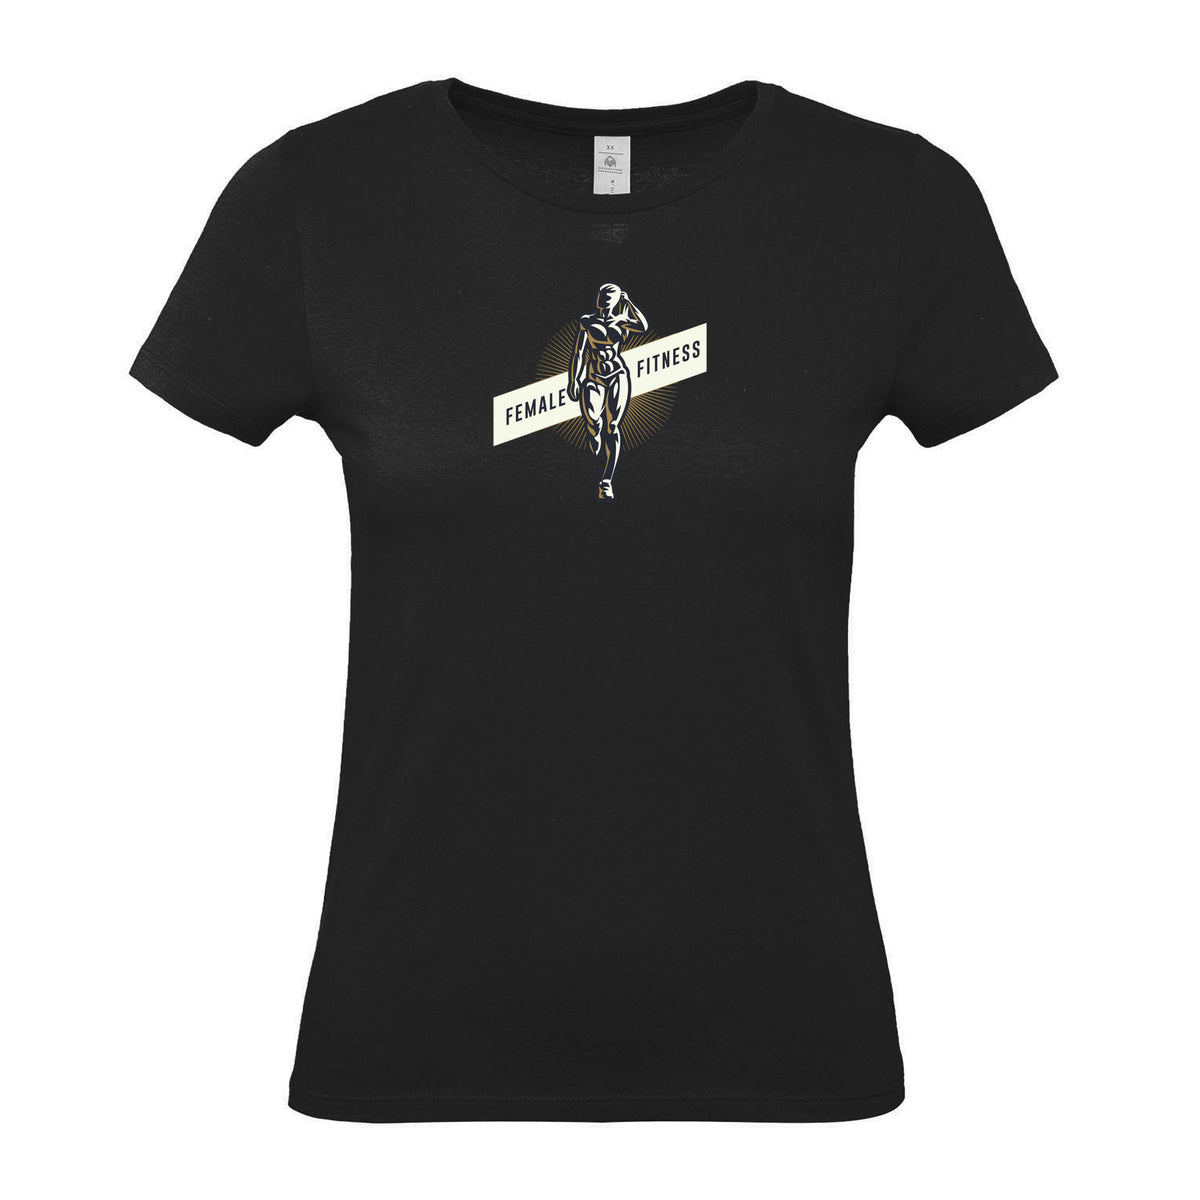 Strong Woman Female Fitness - Women's Gym T-Shirt